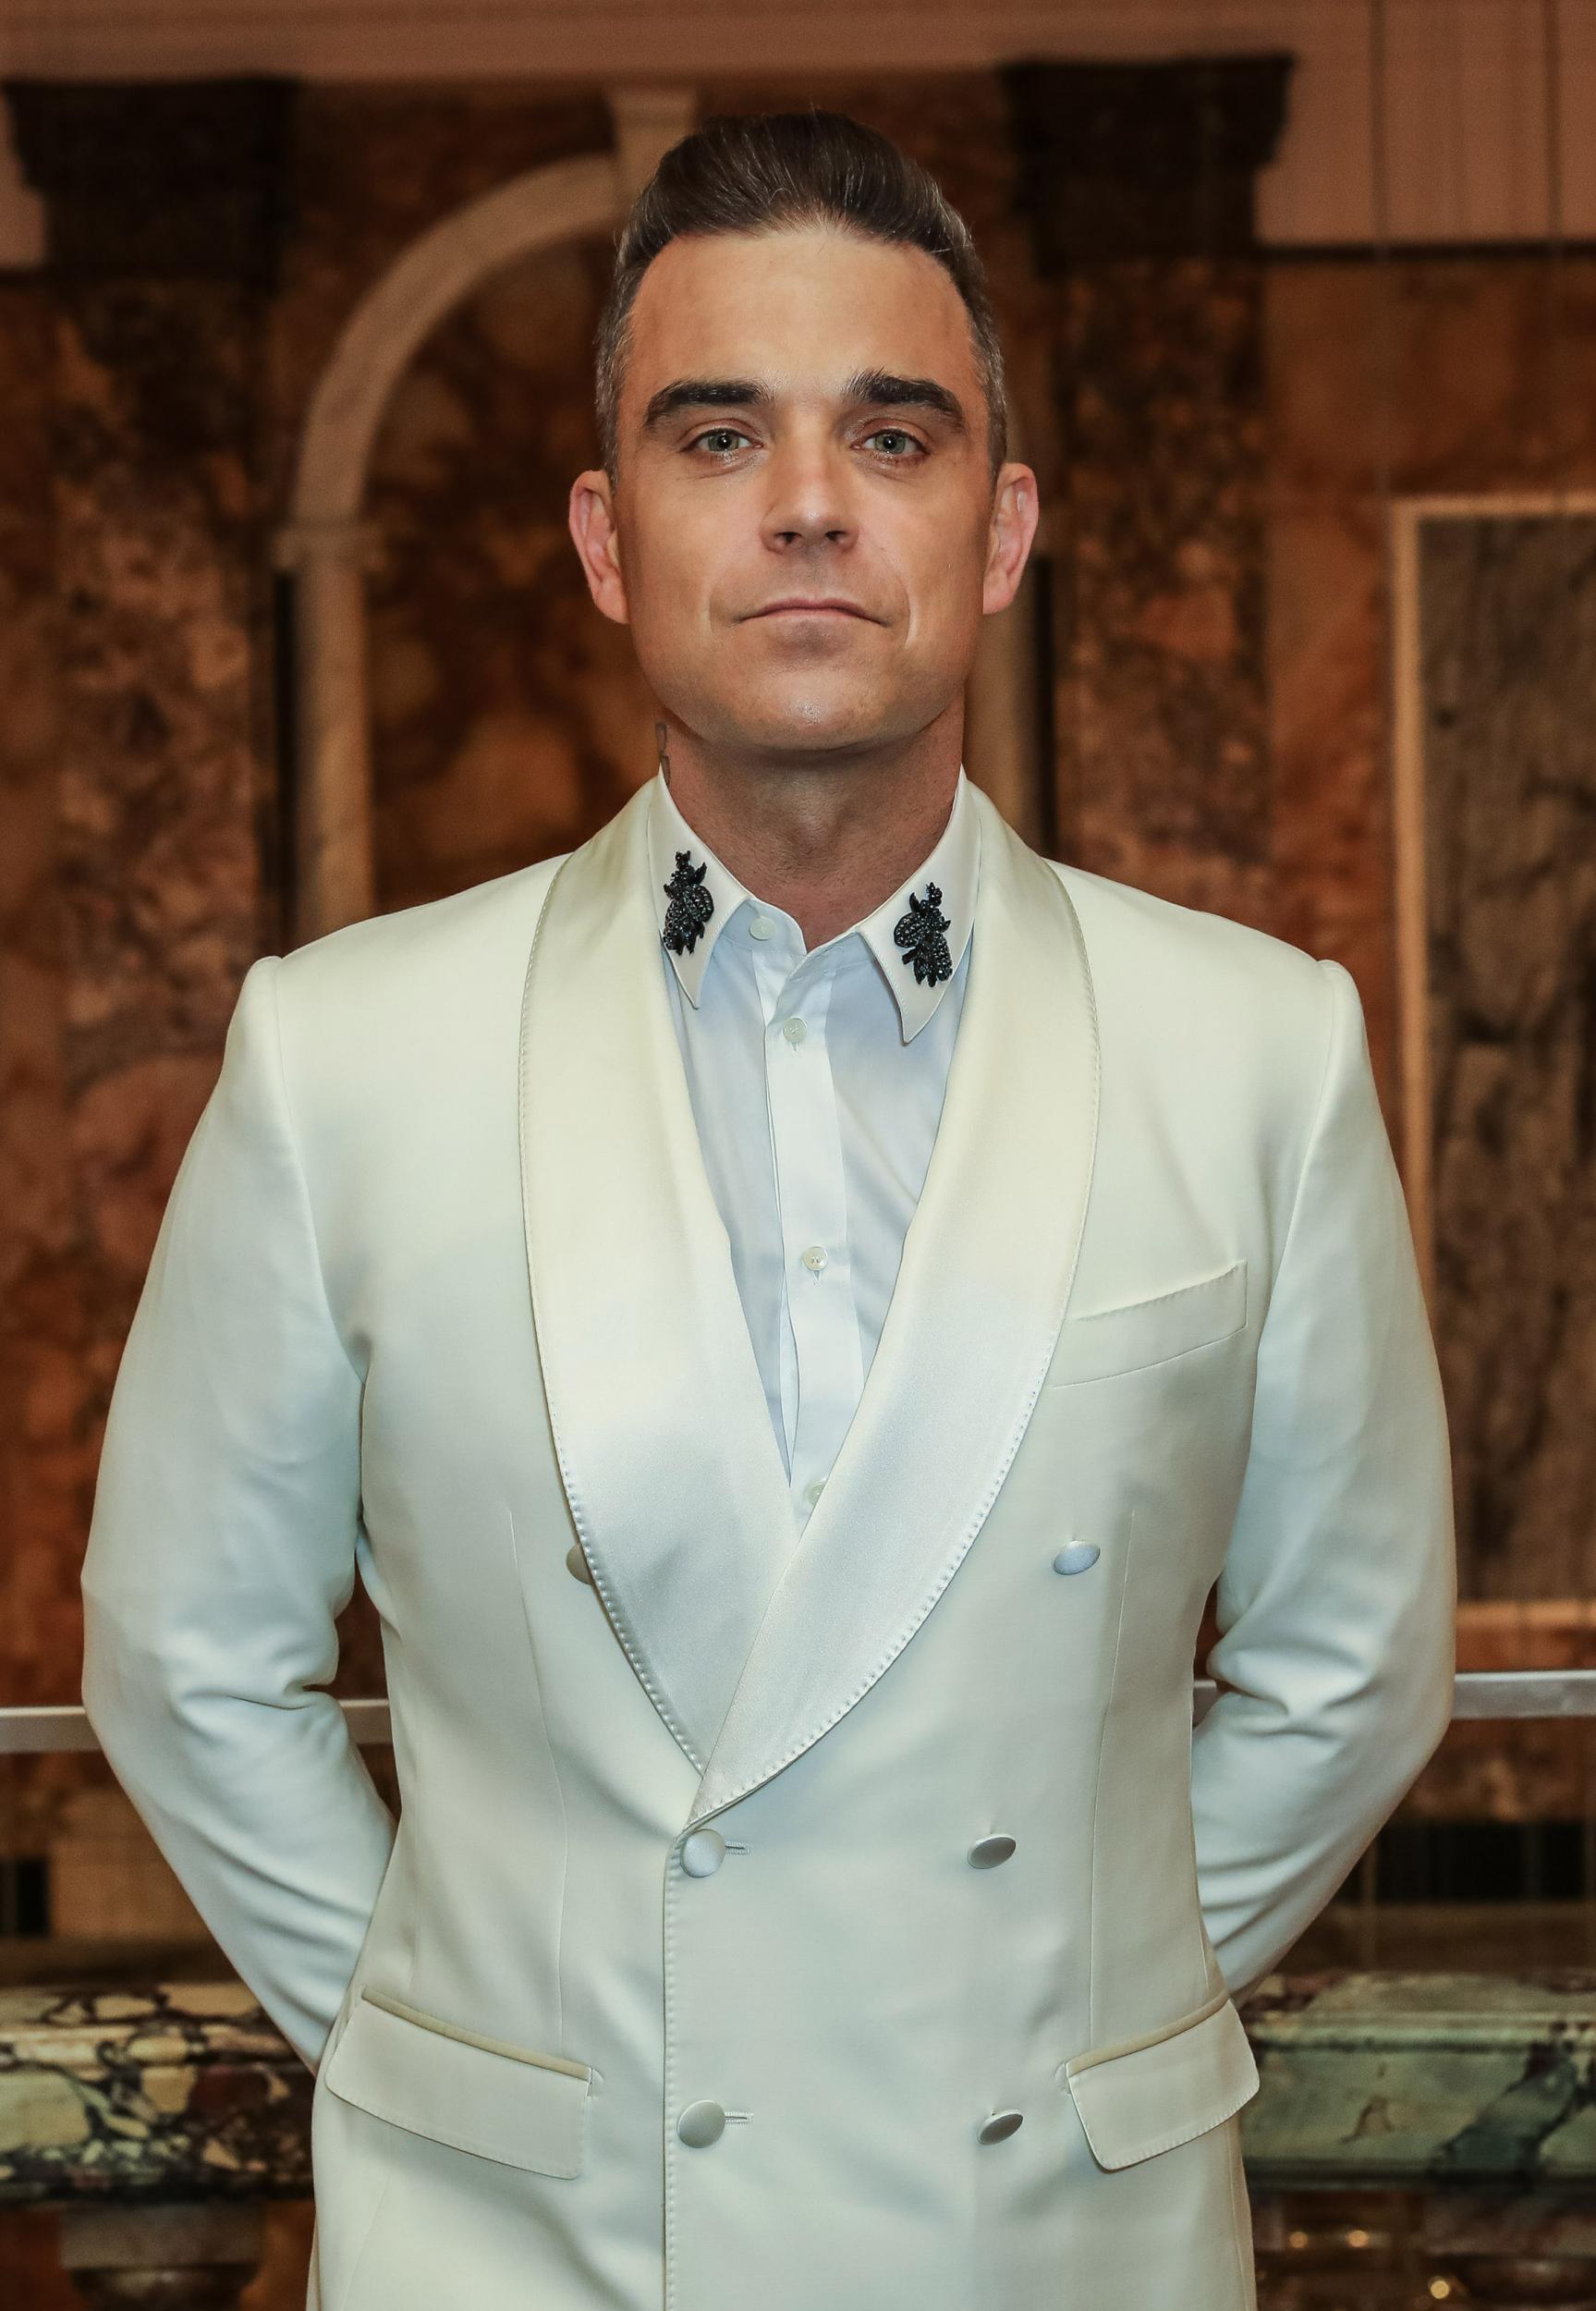 Robbie Williams attends the Attitude Awards 2016 at 8 Northumberland Avenue on October 10, 2016 in London, England.